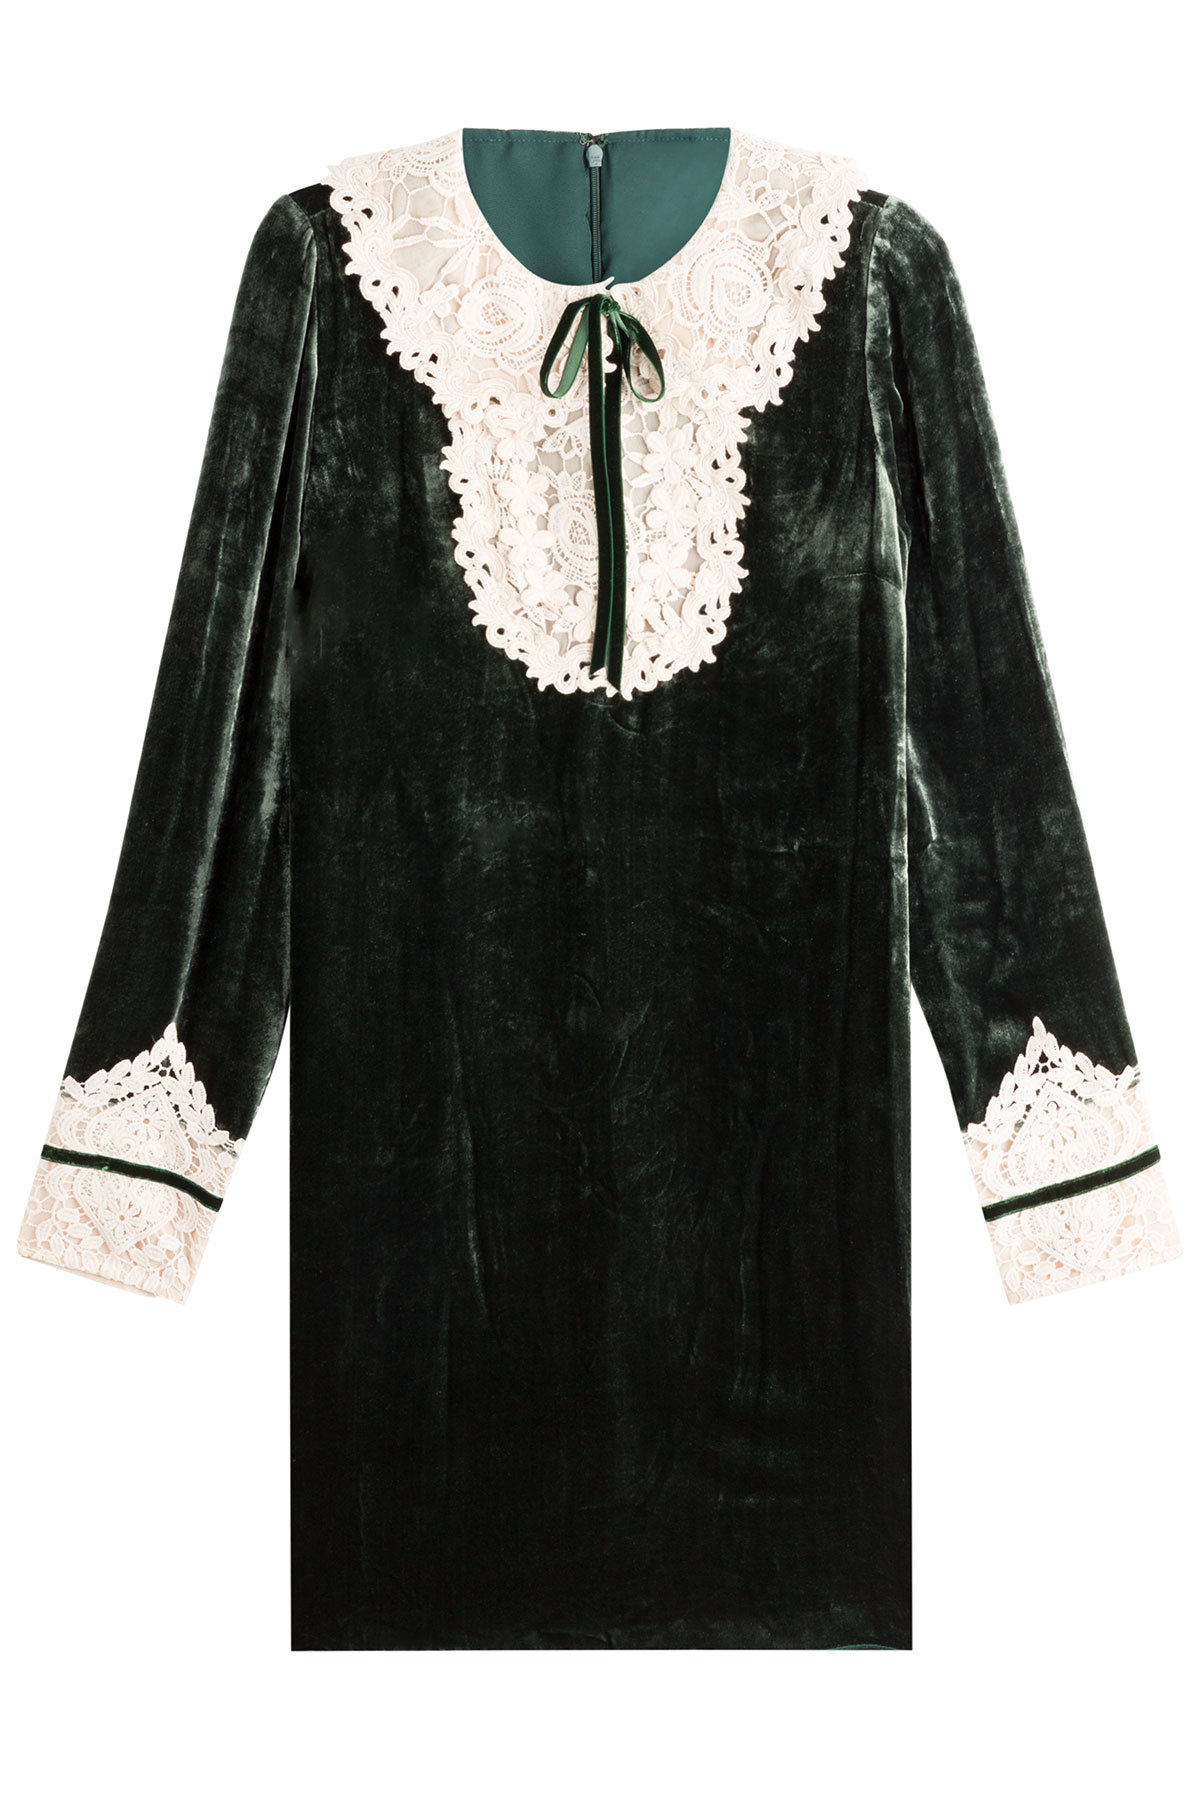 Anna Sui - Velvet Dress with Lace